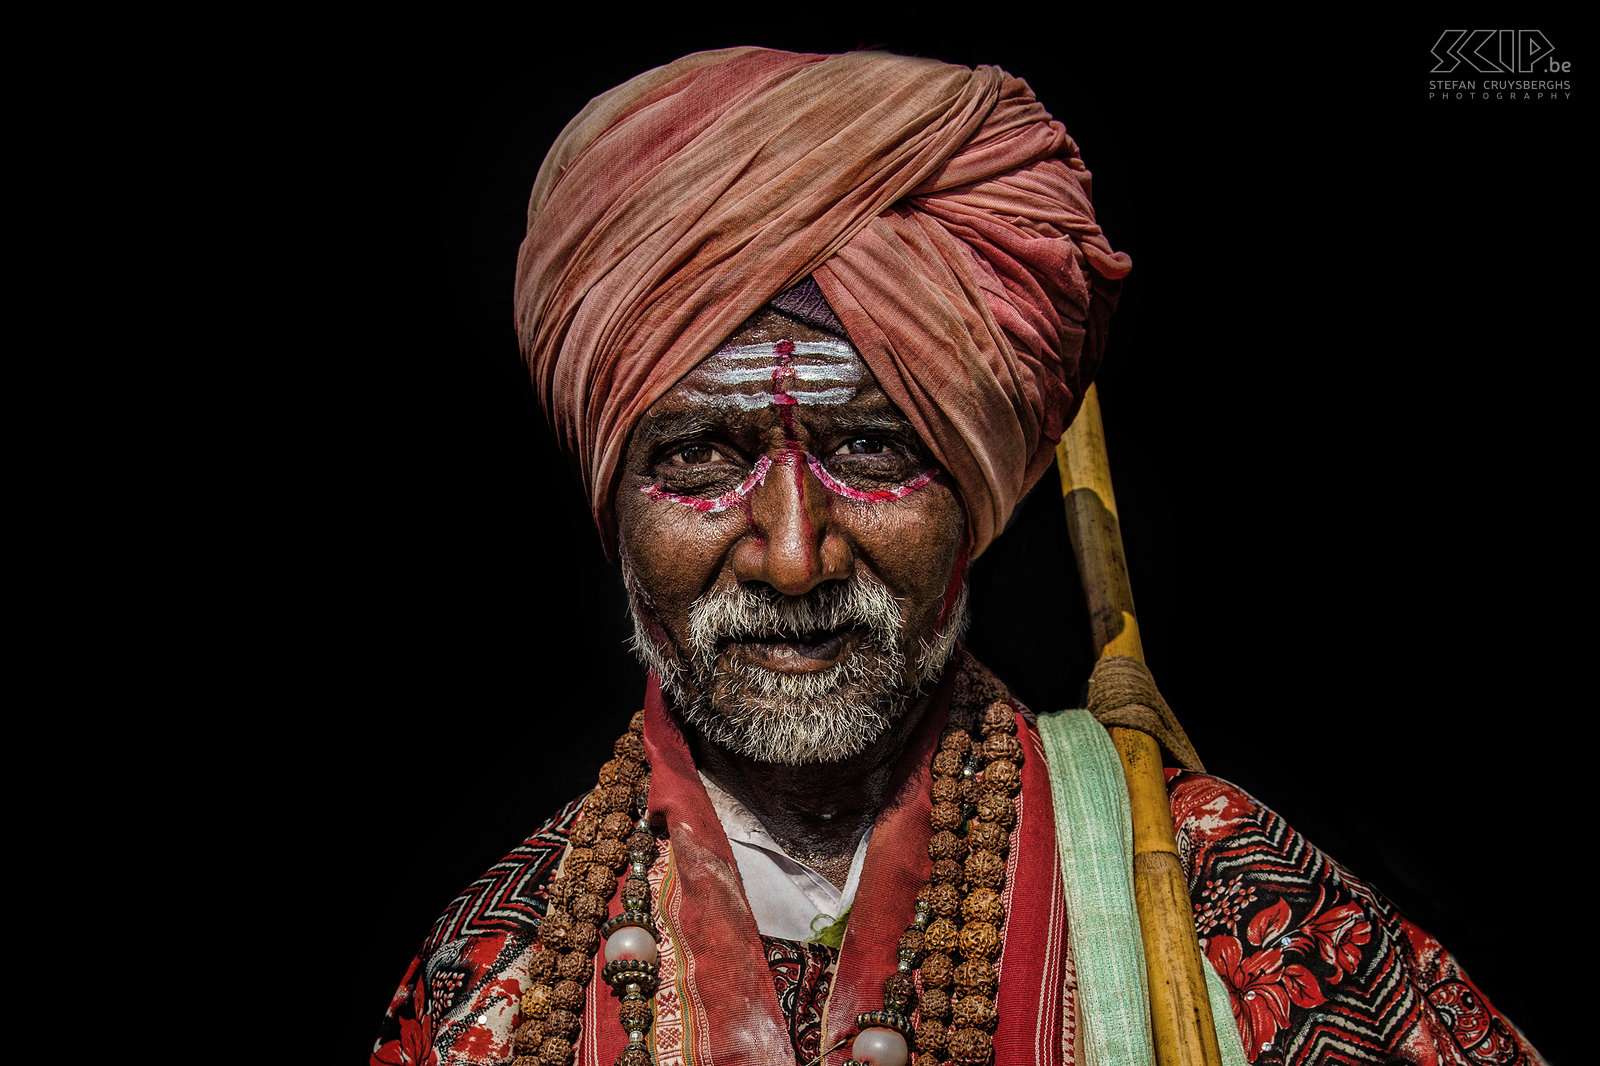 Hampi - Sadhu Portrait of a turban clad sadhu in Hampi. In Hinduism a sadhu (sanyasi) is a religious ascetic or holy man who left behind all material attachments and who focusses on the spiritual practice of Hinduism Stefan Cruysberghs